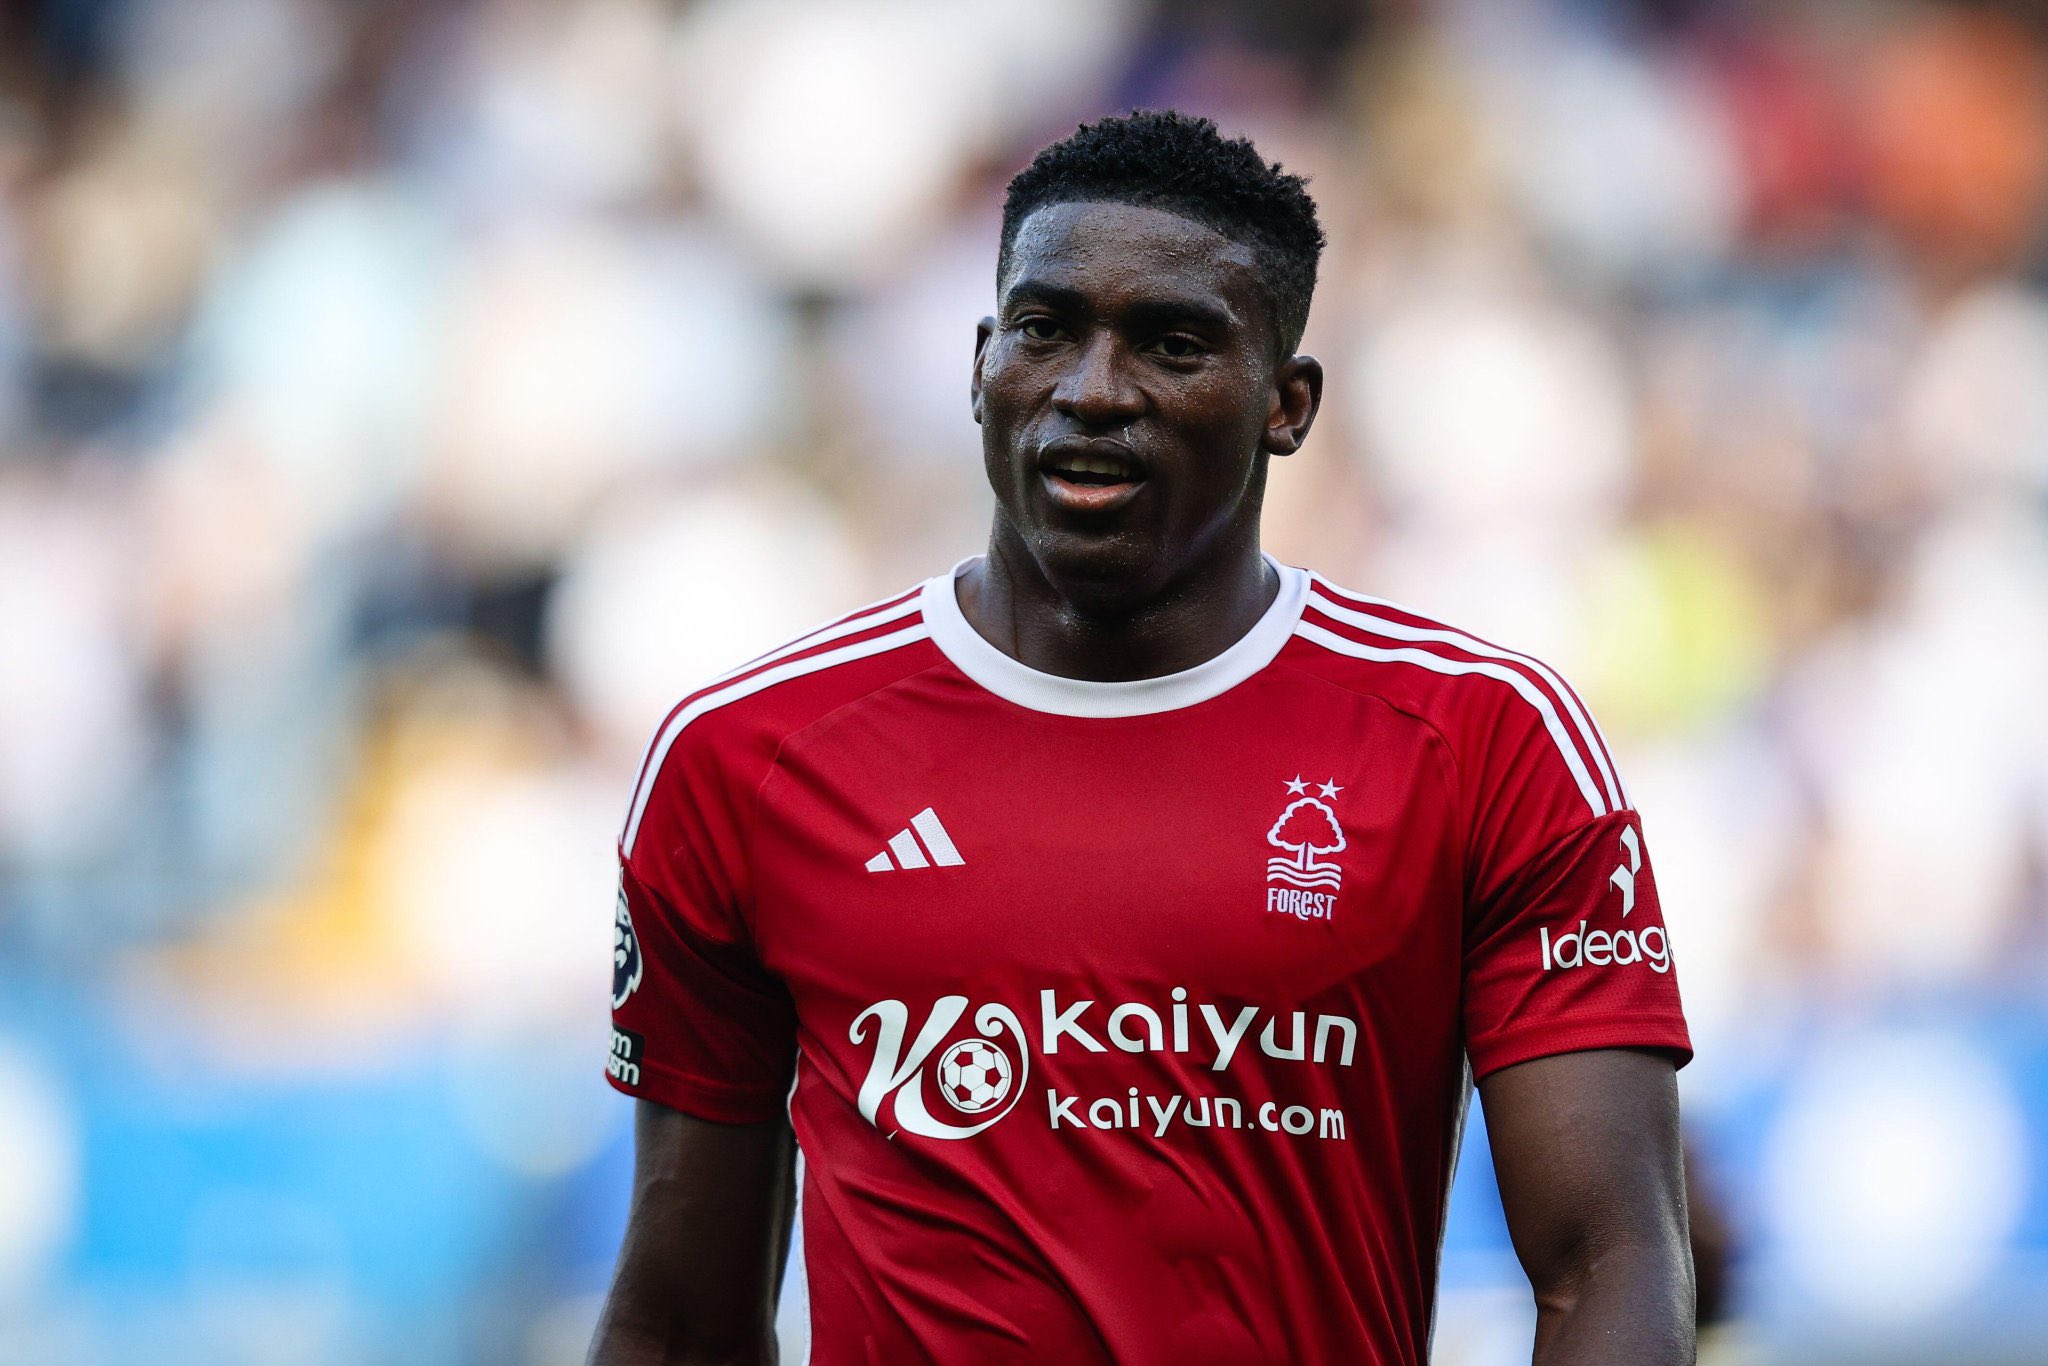 Transfer: Julen Lopetegui eyes Taiwo Awoniyi for summer signing, but Forest sets terms